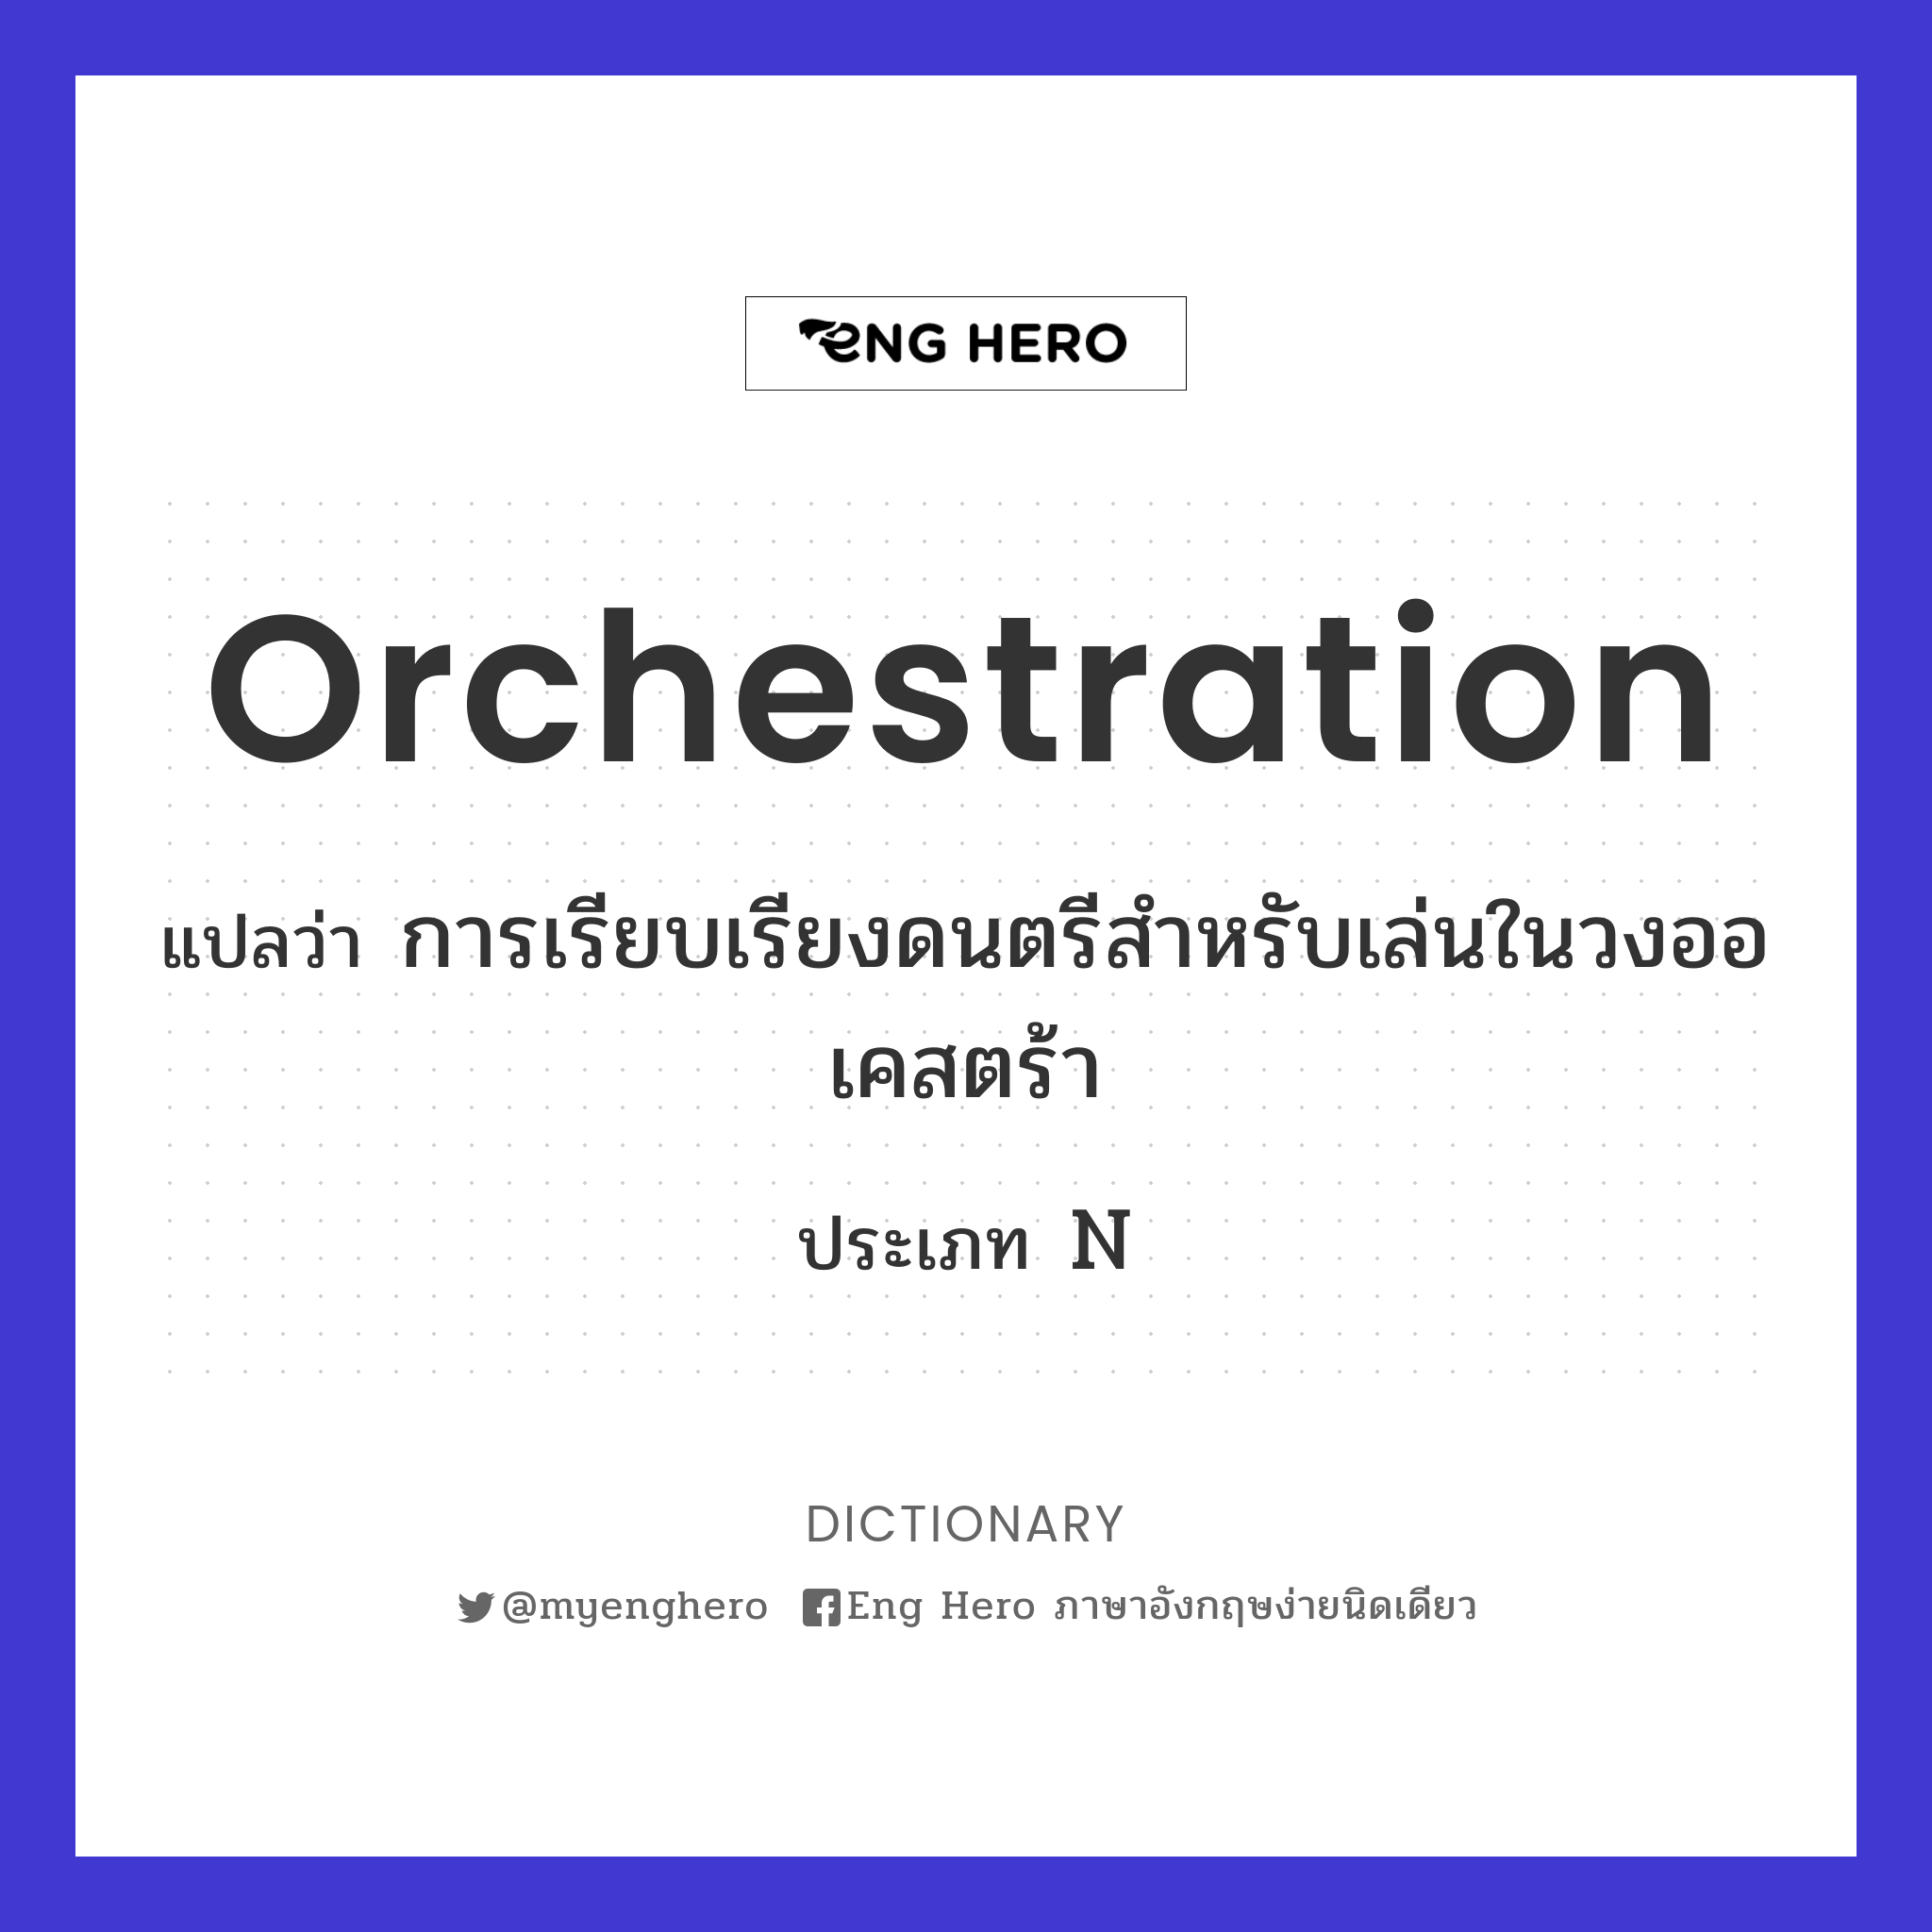 orchestration